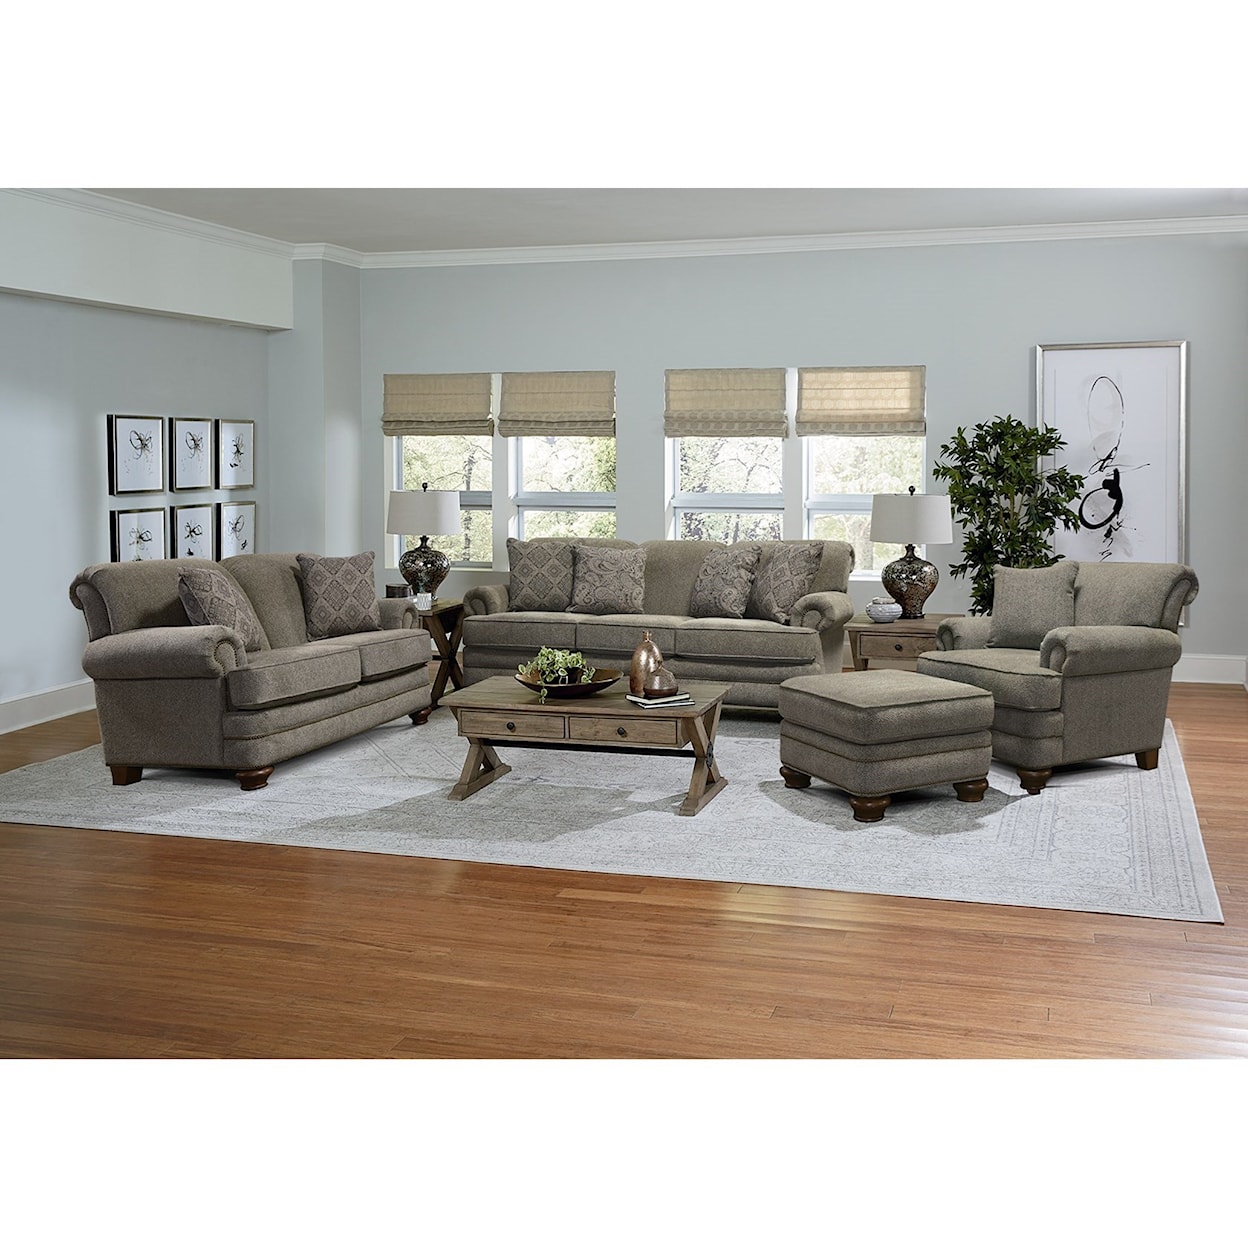 Tennessee Custom Upholstery 5Q00/N Series Stationary Living Room Group